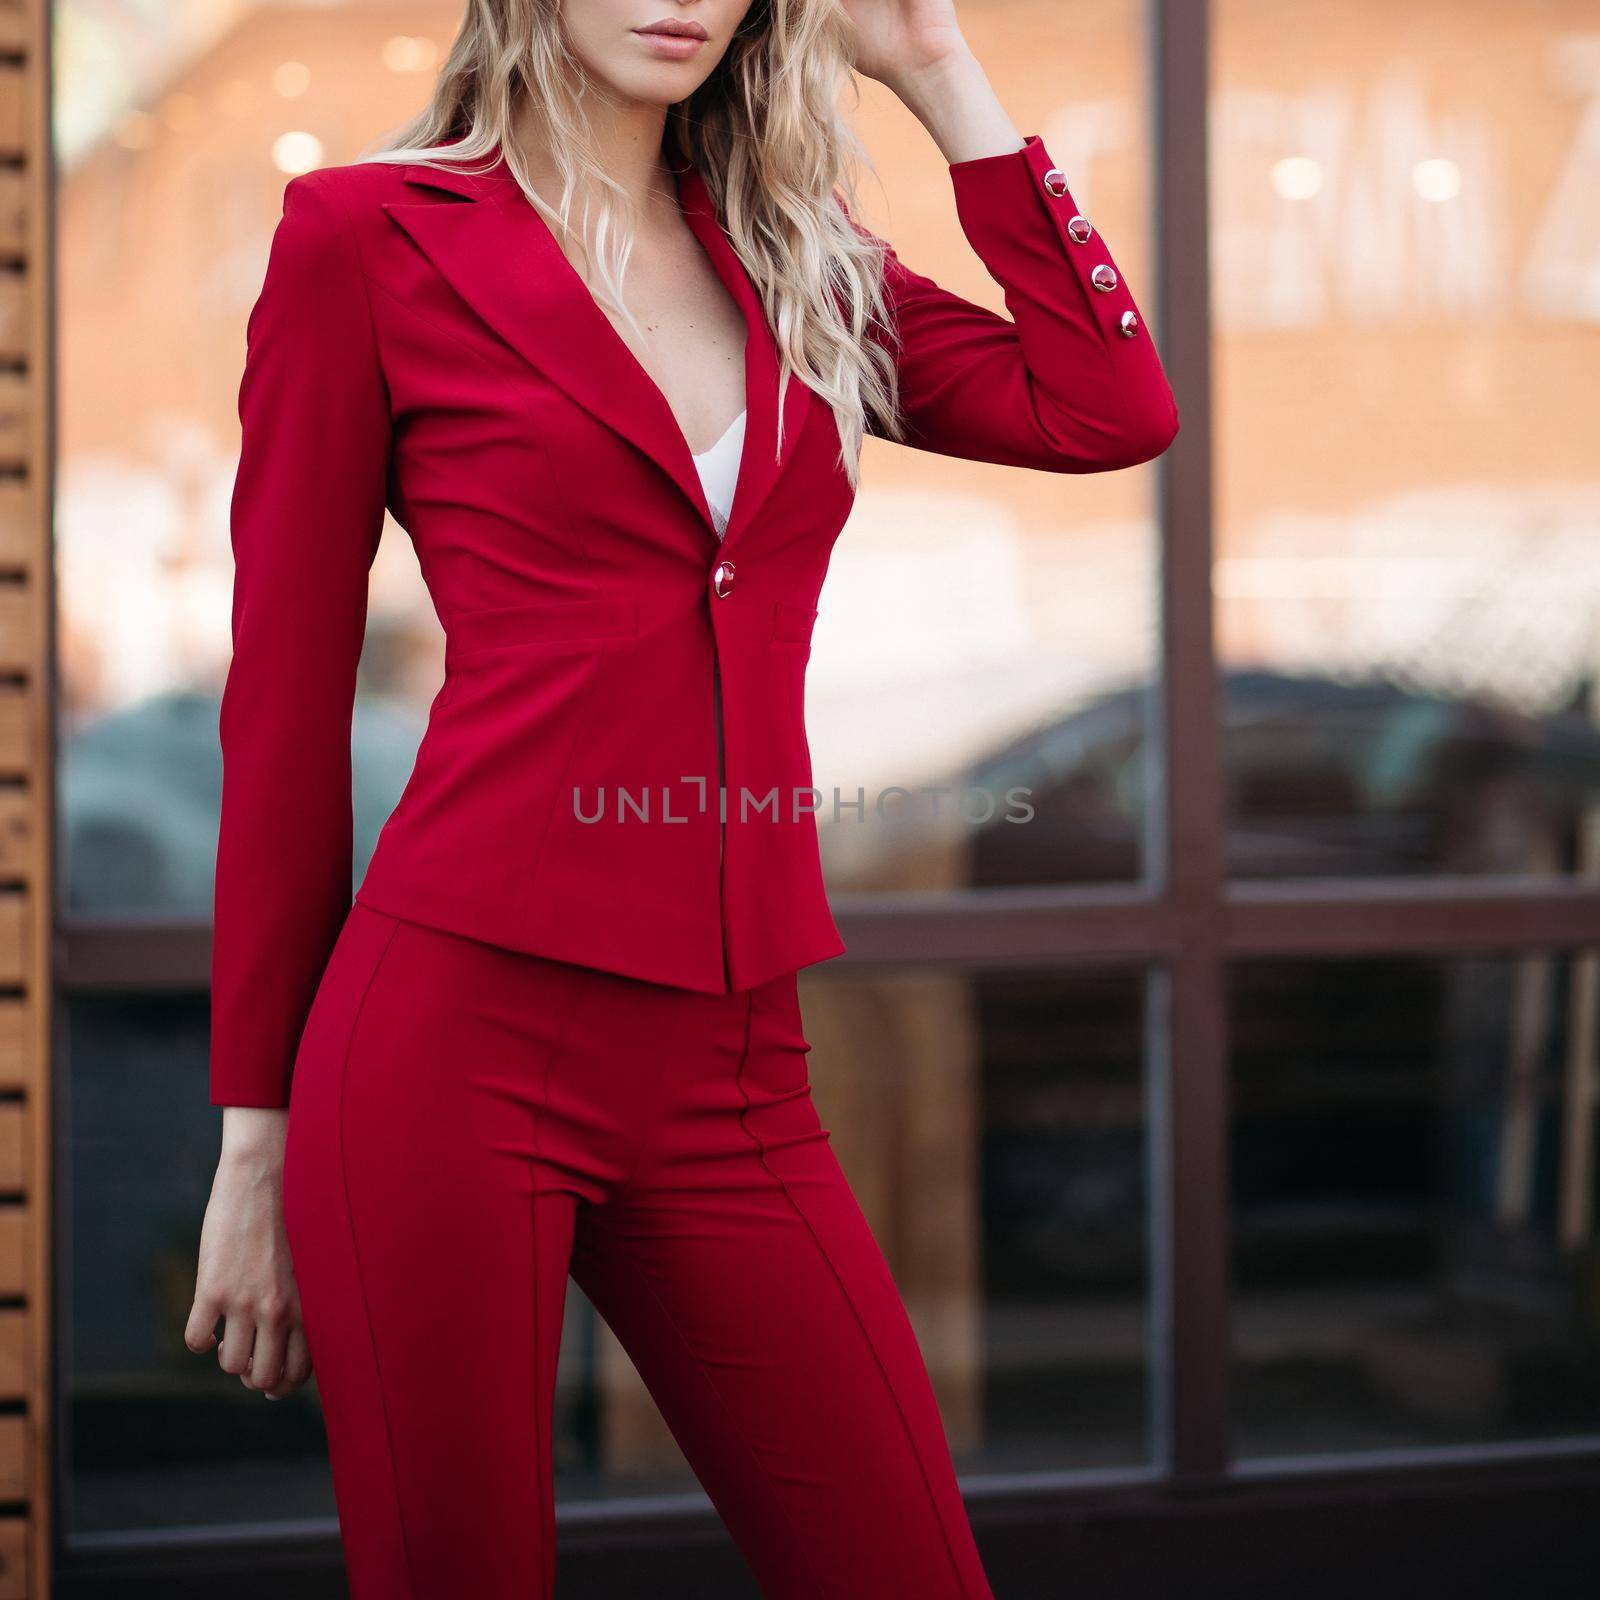 Elegant blonde woman in dark red suit with gold buttons. by StudioLucky